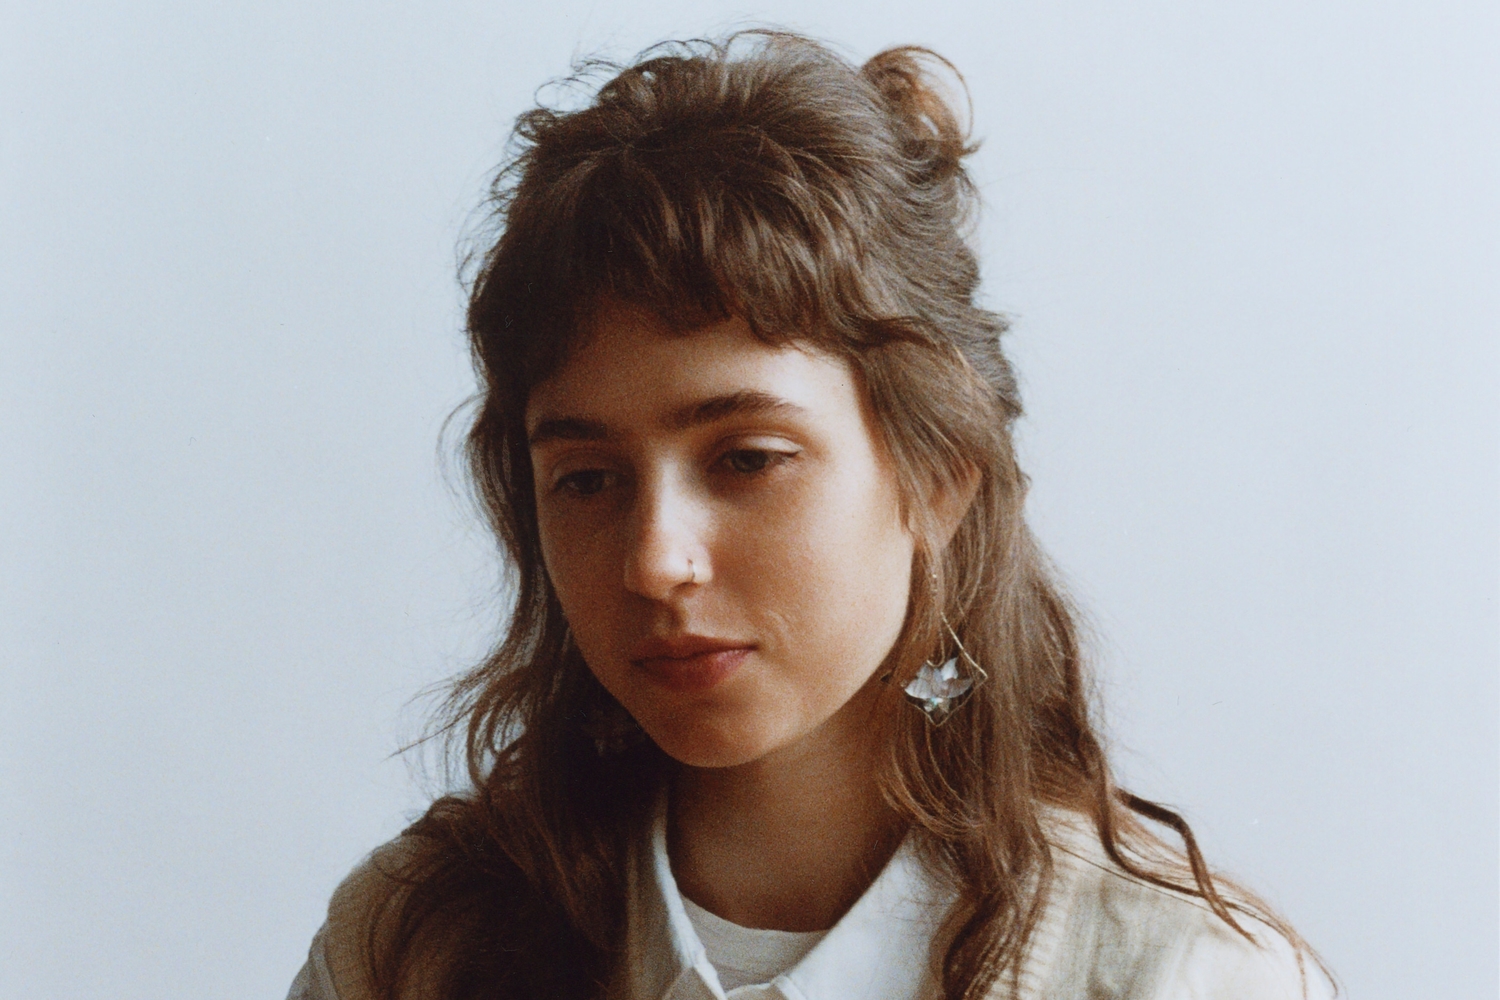 Clairo shares new single ‘Nomad’ from upcoming album ‘Charm’